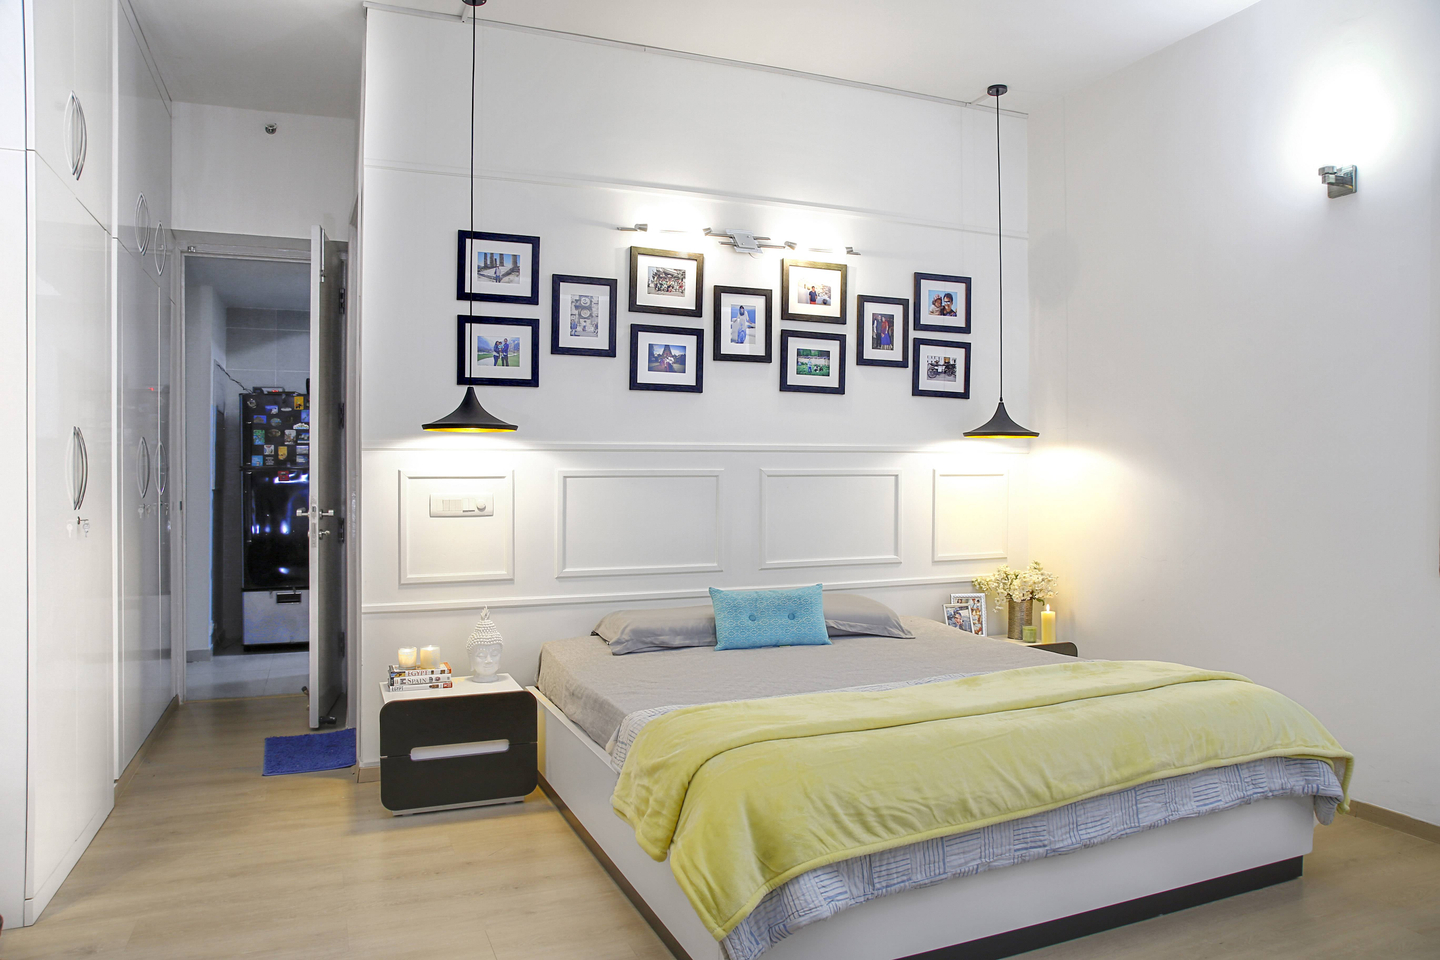 Contemporary Bedroom Design With A White Bed And Wooden Side Tables